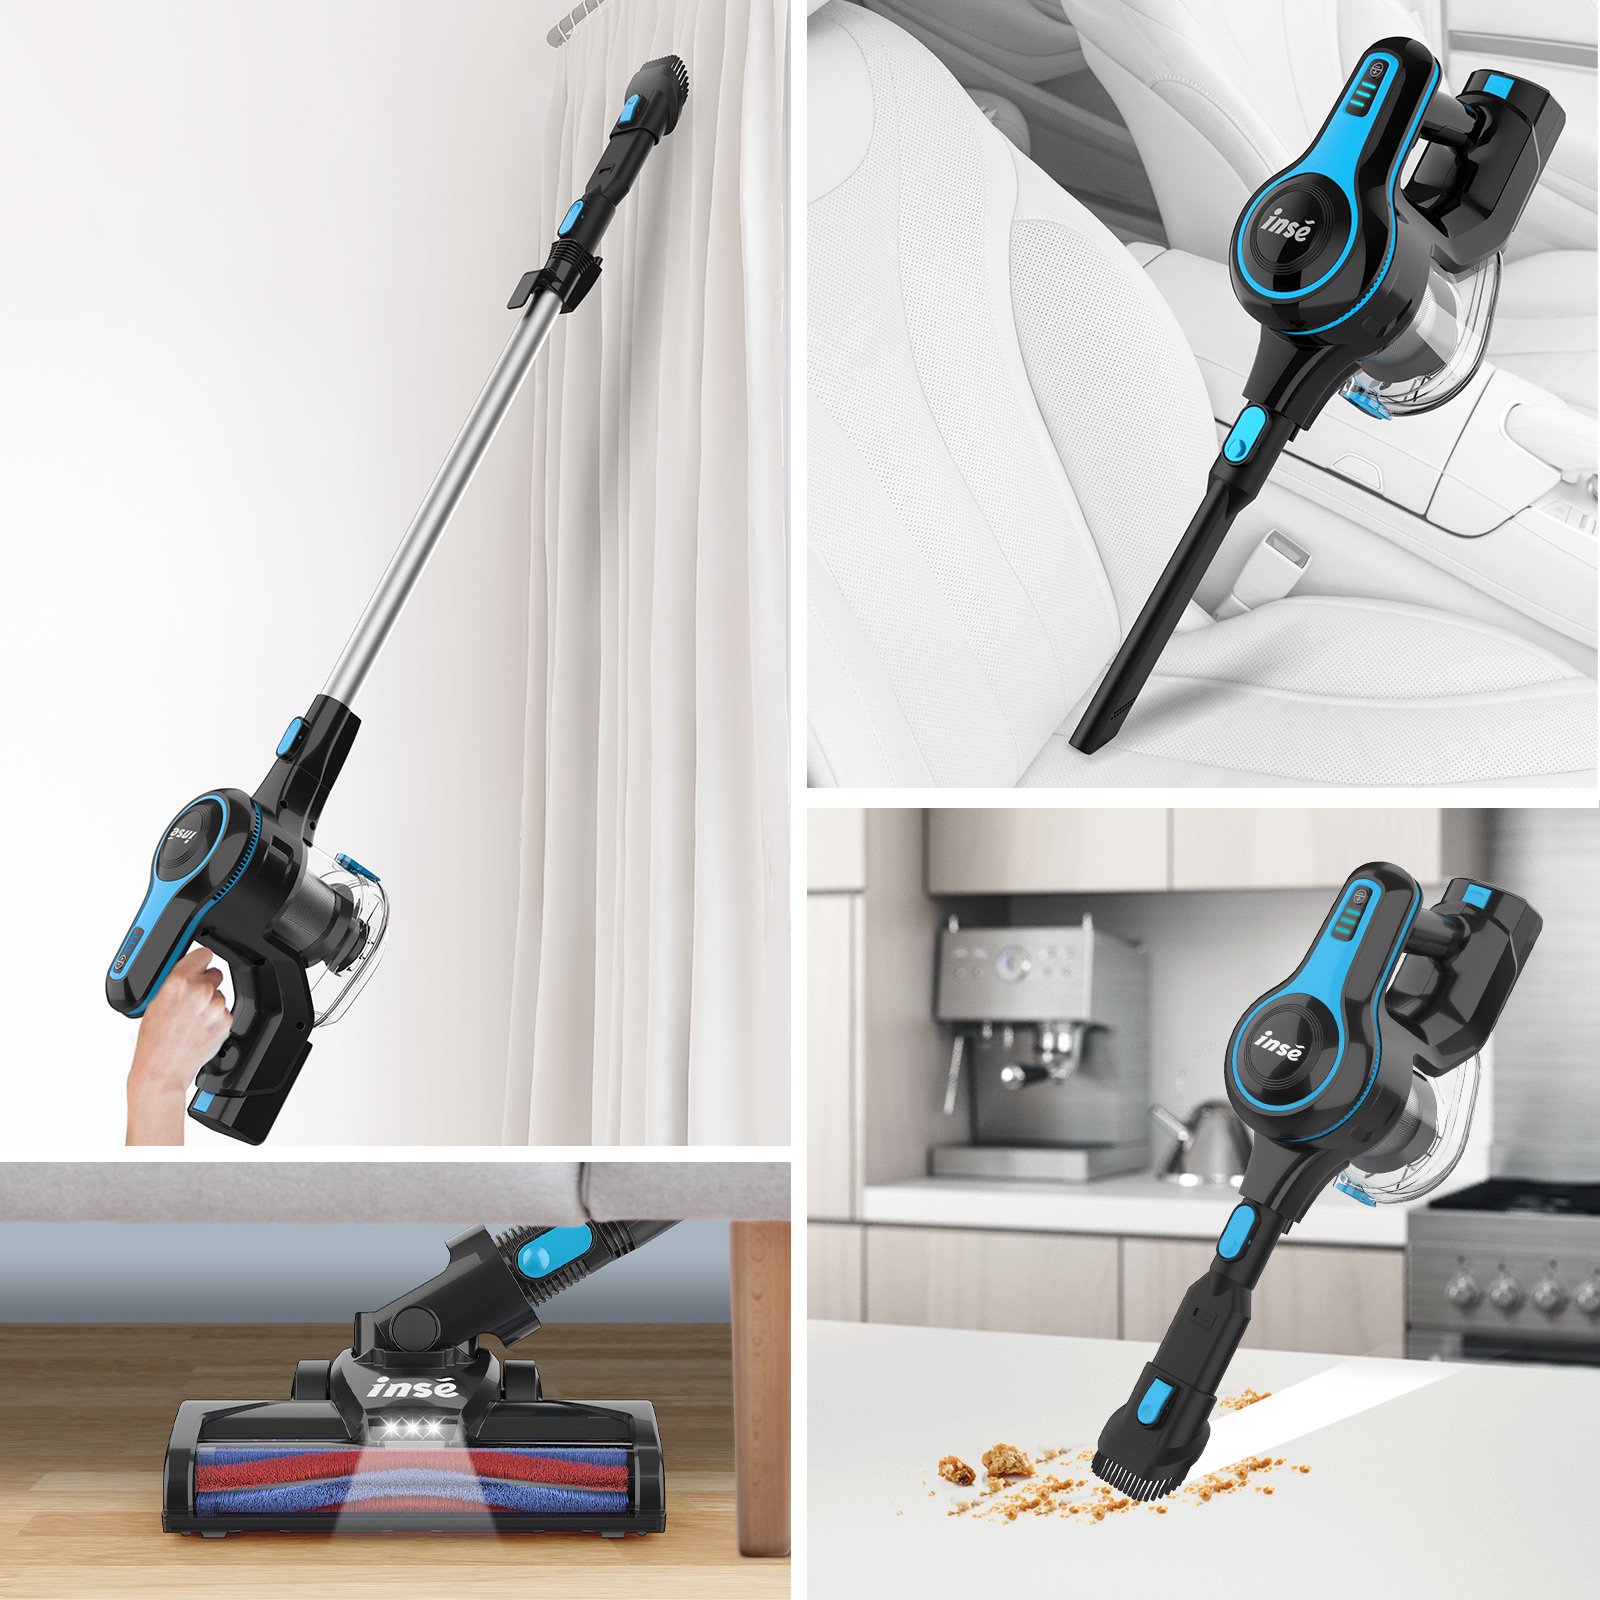 INSE Cordless Vacuum Cleaner, 6-in-1 Rechargeable Stick Vacuum with 2200 mAh Battery, Powerful Lightweight Vacuum Cleaner, Up to 45 Mins Runtime, for Home Hard Floor Carpet Pet Hair - 2